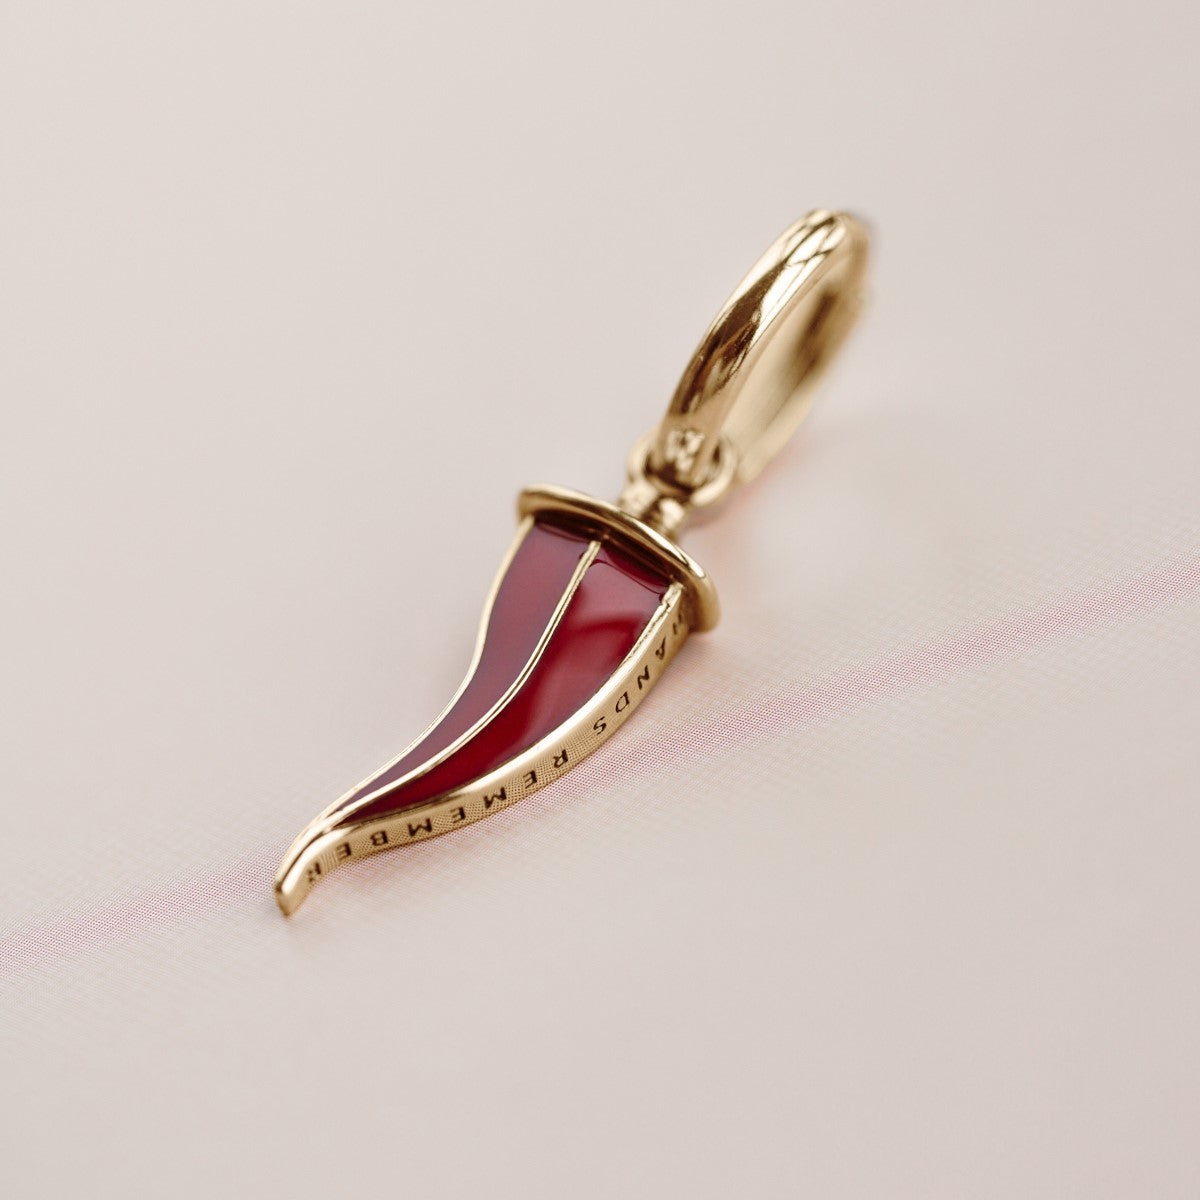 EARRING "LUCKY FLAME" WITH RED ENAMEL / GOLD